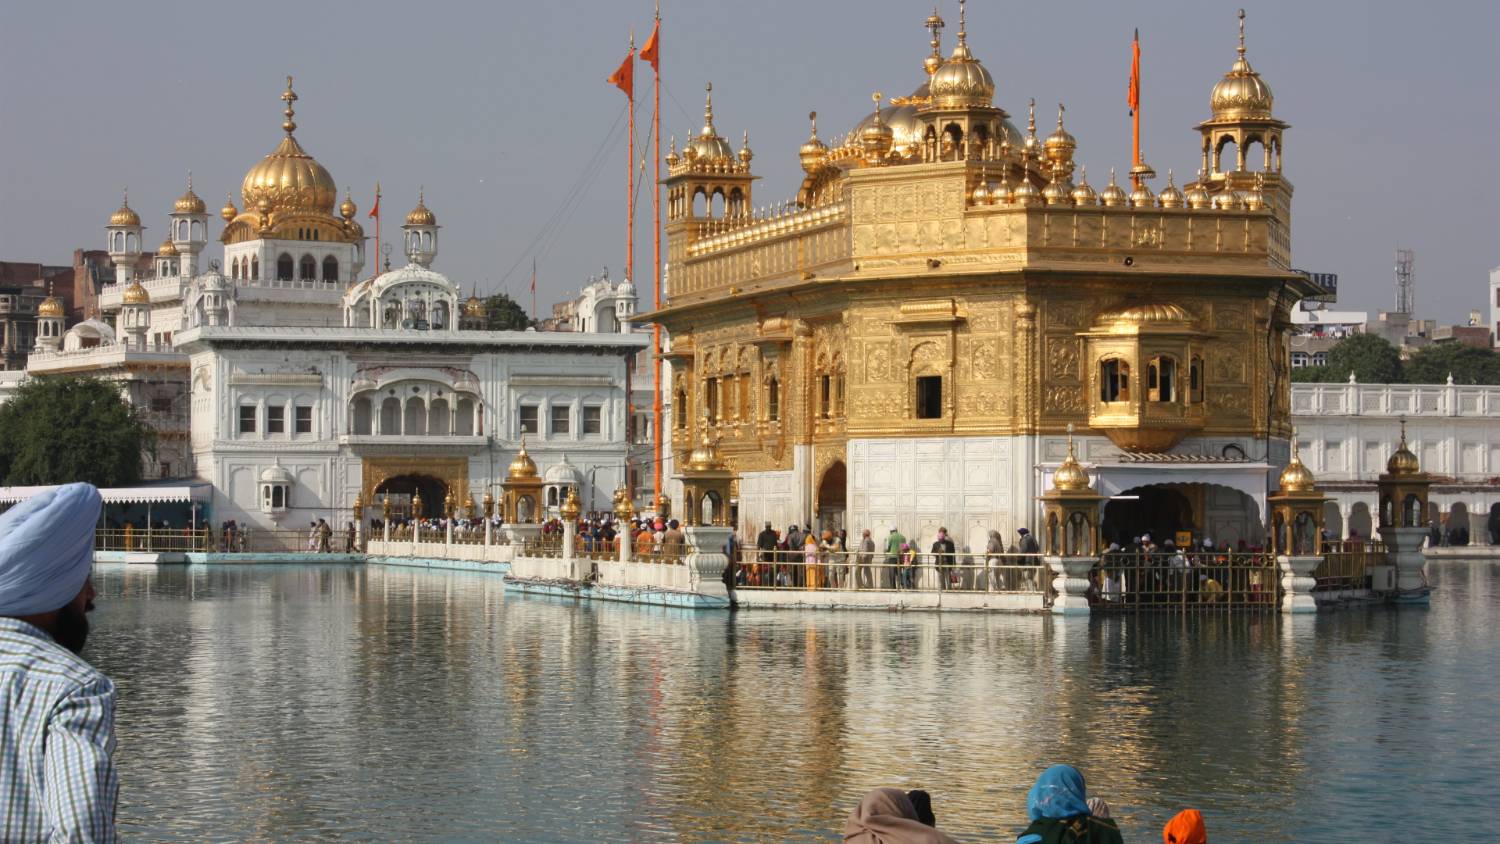 The Golden Temple is surrounded by water and is known as the Pool of Immortality (Arian Zwegers/CC)